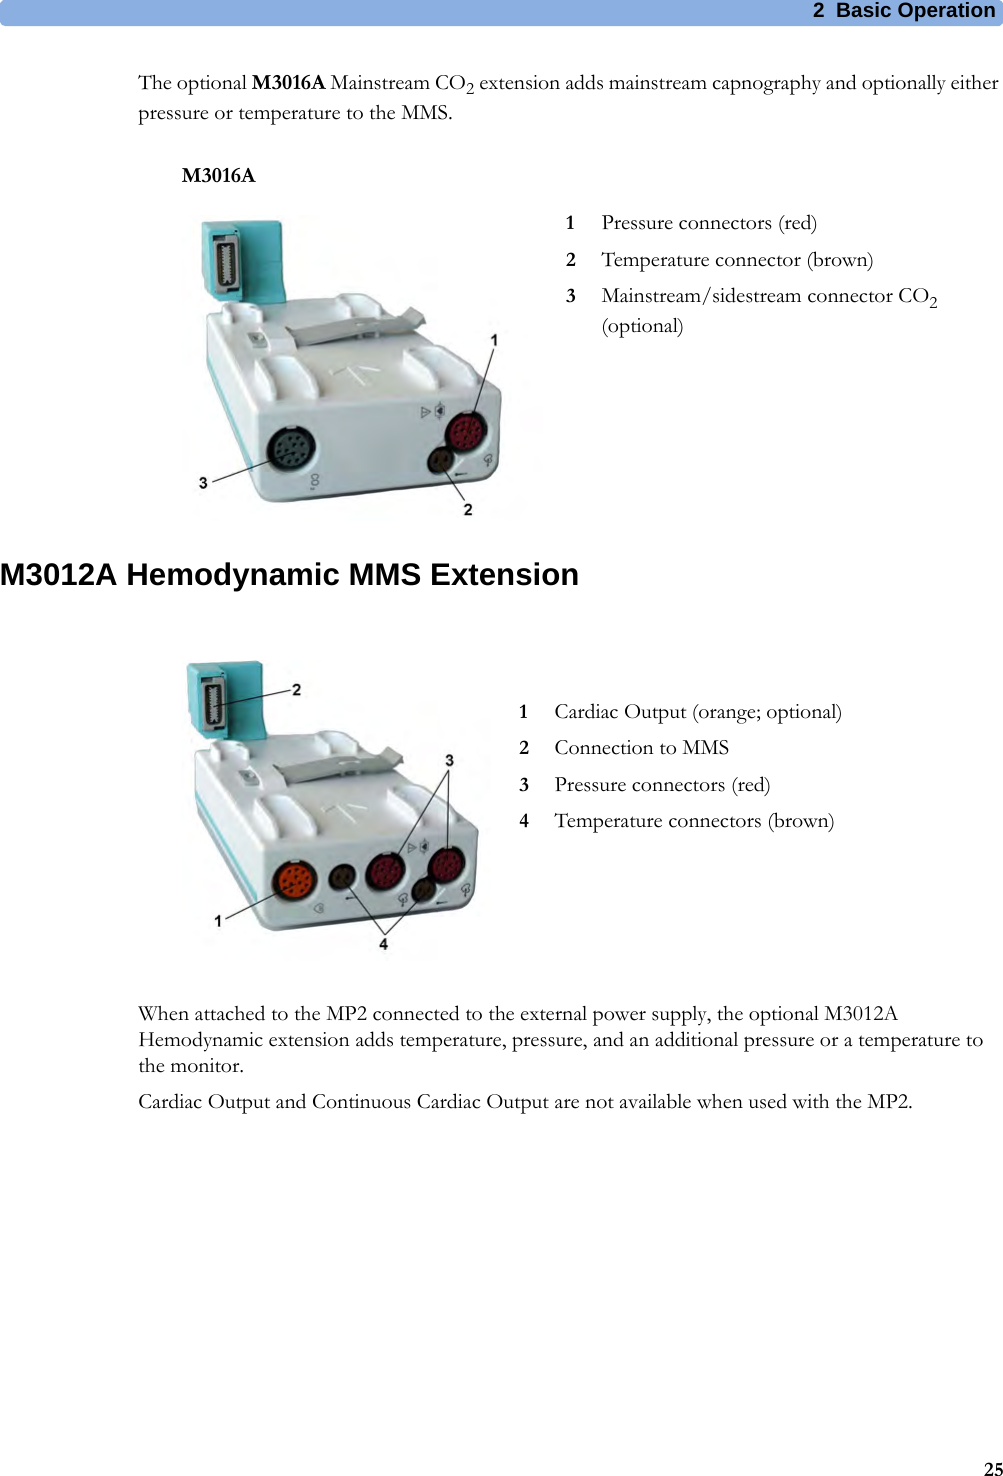 2 Basic Operation25The optional M3016A Mainstream CO2 extension adds mainstream capnography and optionally either pressure or temperature to the MMS. M3012A Hemodynamic MMS ExtensionWhen attached to the MP2 connected to the external power supply, the optional M3012A Hemodynamic extension adds temperature, pressure, and an additional pressure or a temperature to the monitor.Cardiac Output and Continuous Cardiac Output are not available when used with the MP2.M3016A1Pressure connectors (red)2Temperature connector (brown)3Mainstream/sidestream connector CO2 (optional)1Cardiac Output (orange; optional)2Connection to MMS3Pressure connectors (red)4Temperature connectors (brown)